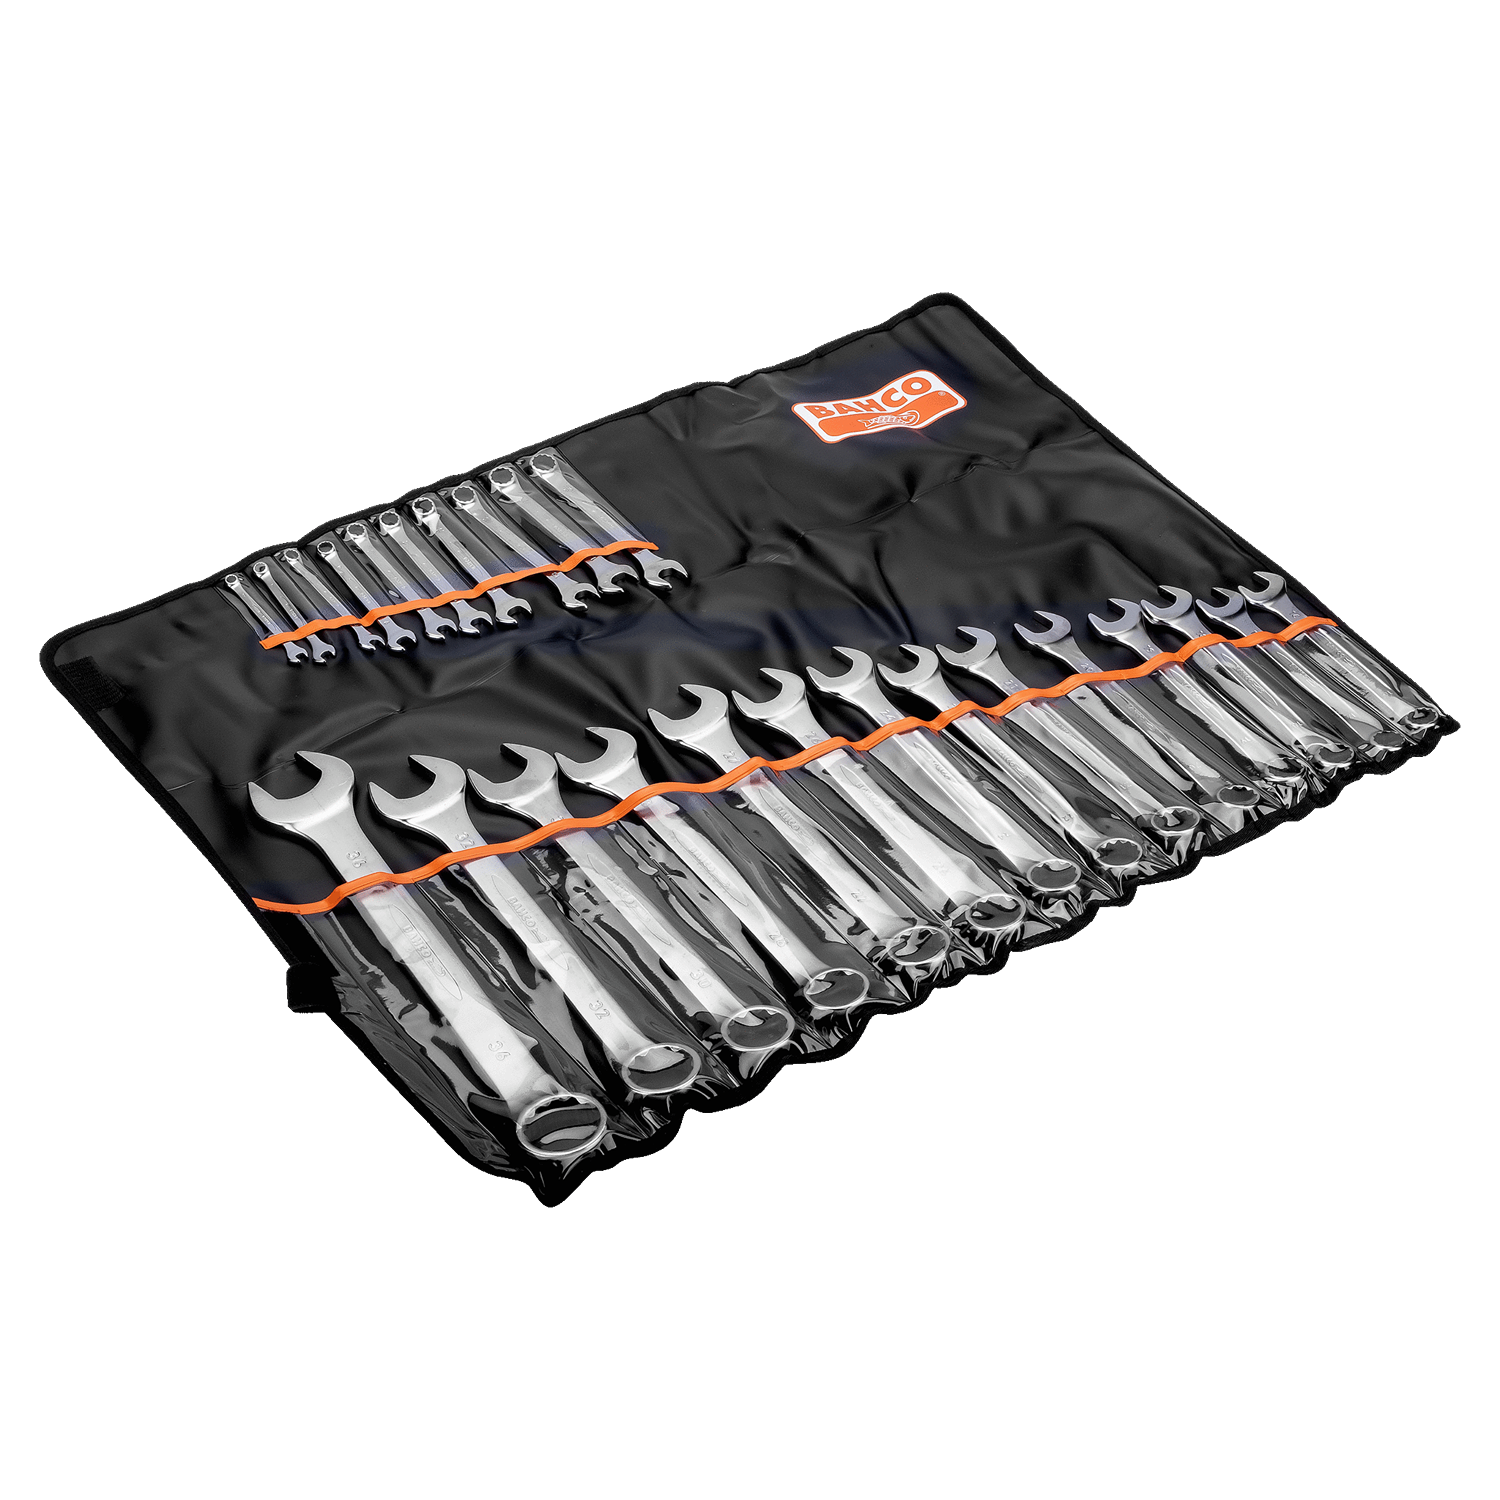 BAHCO 111M/24T Metric Flat Combination Wrench Set - 24 Pcs - Premium Flat Combination Wrench Set from BAHCO - Shop now at Yew Aik.